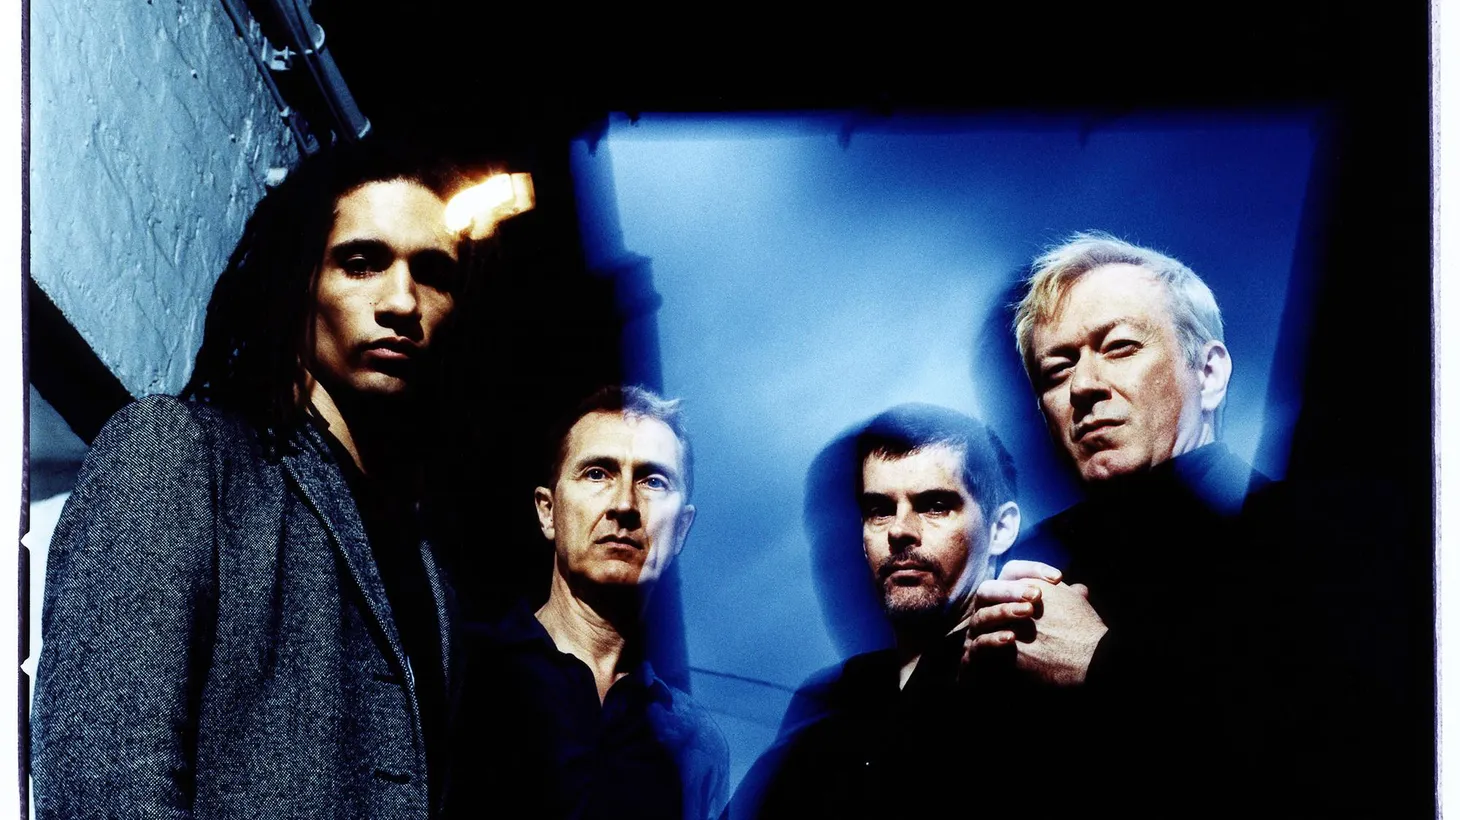 Gang of Four defined the early English post-punk era and have inspired countless bands to this day. After fifteen long years, they've recorded a brand new album which they will perform, along with some of their classics, for Morning Becomes Eclectic listeners at 11:15am.